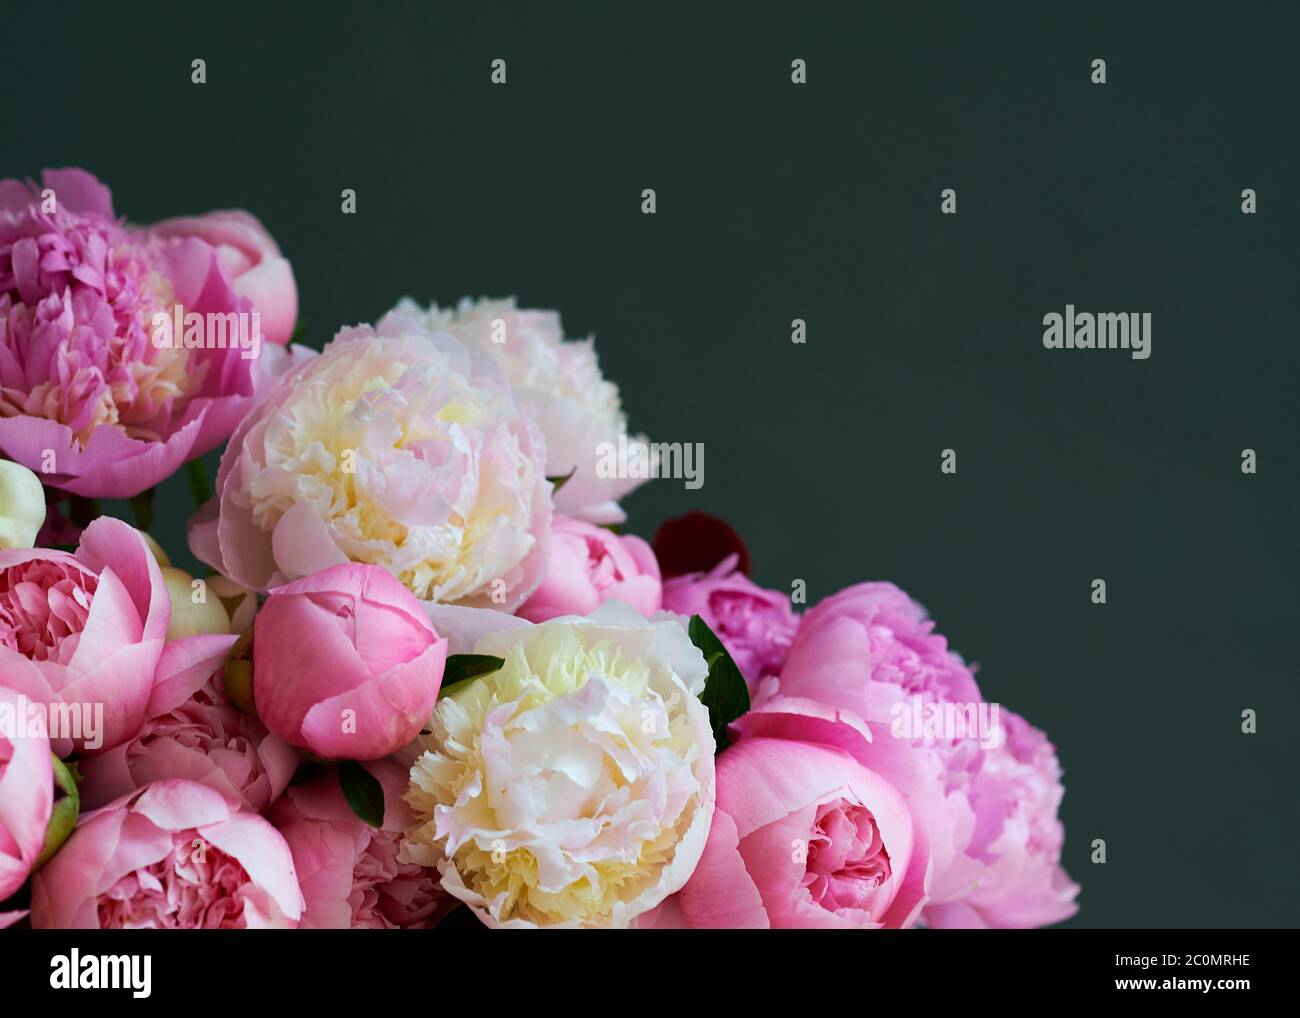 Background with beautiful white and pink flowers peonies. Stock Photo